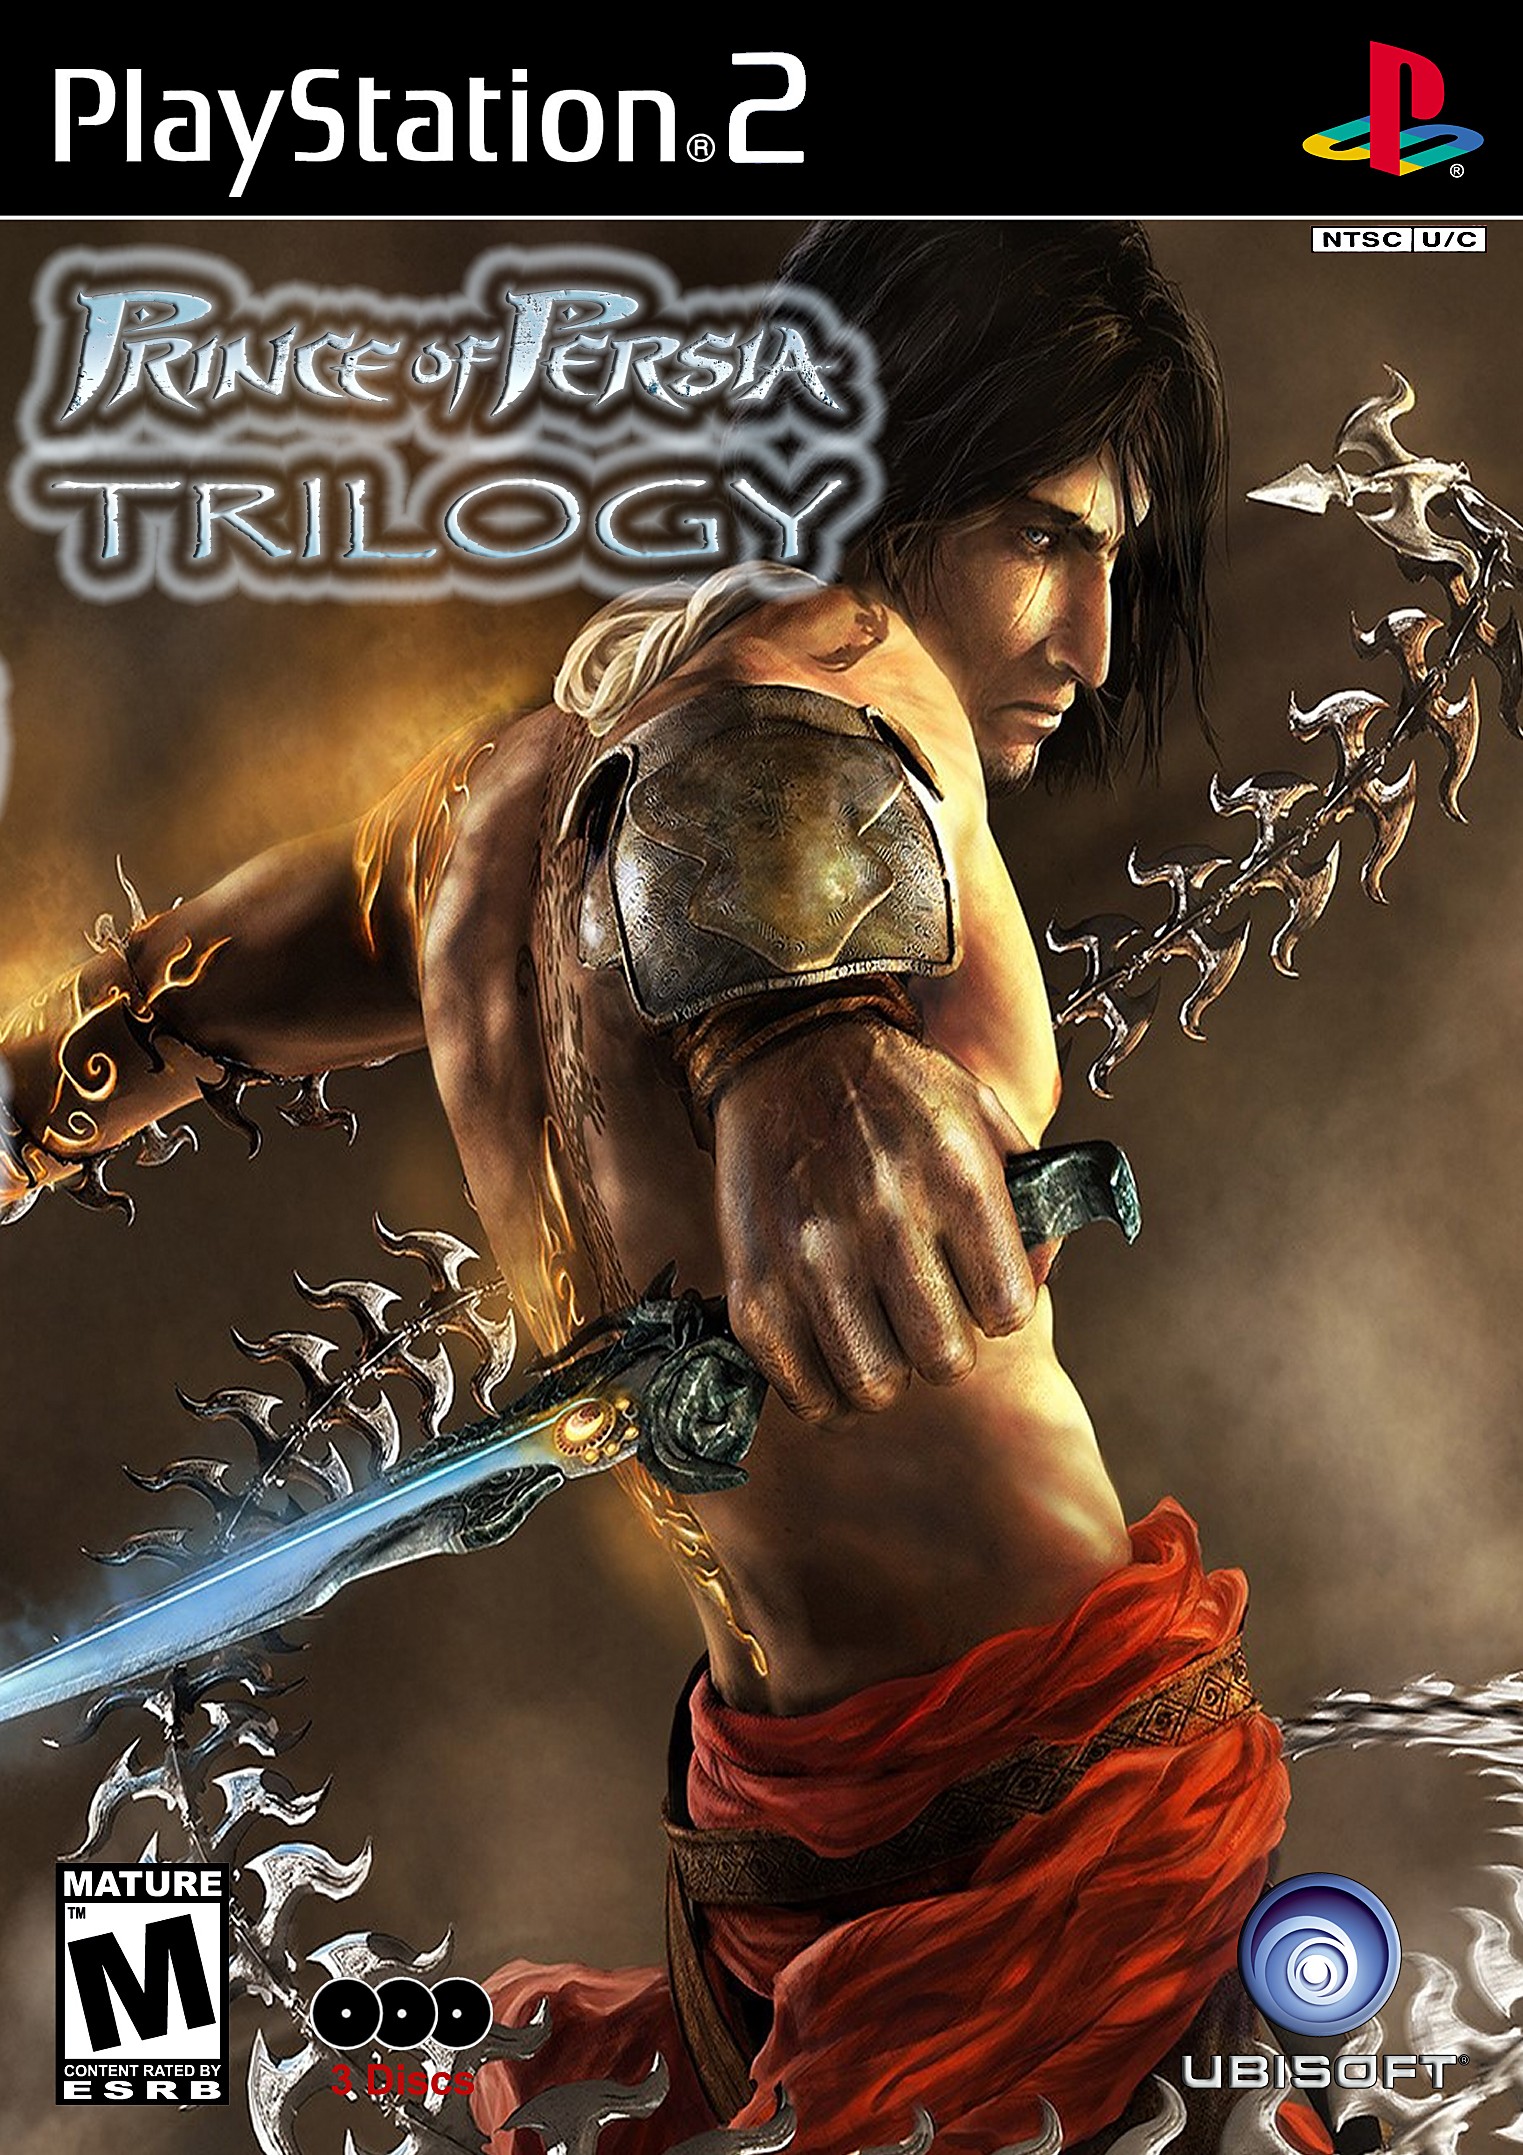 'Prince of Persia Trilogy'